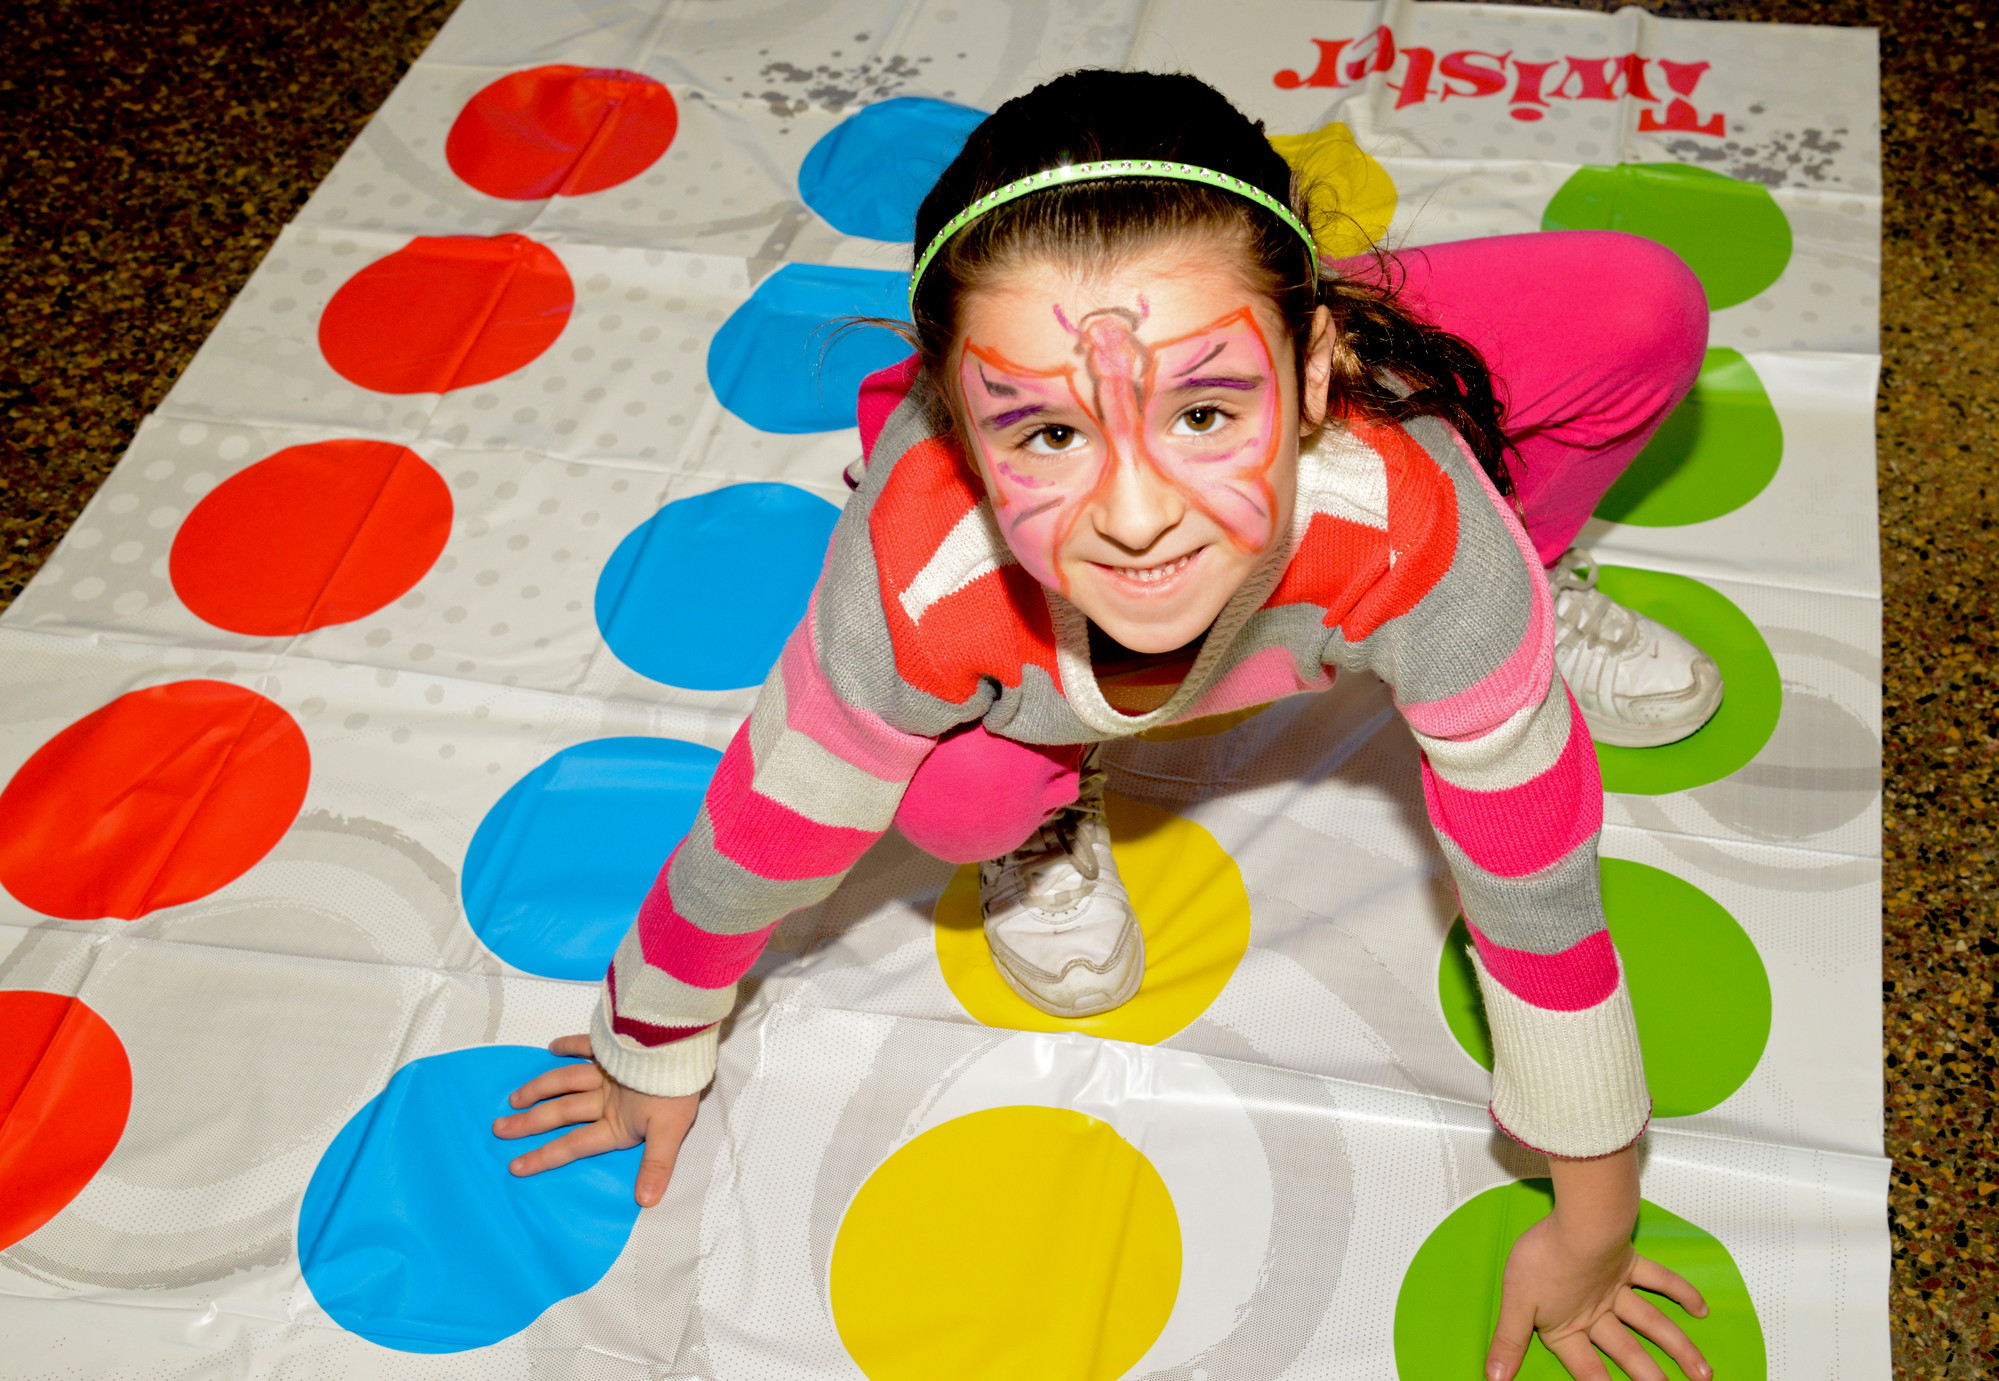 Briana, 5, had a blast on the Twister mat shortly after getting a butterfly painted on her face.